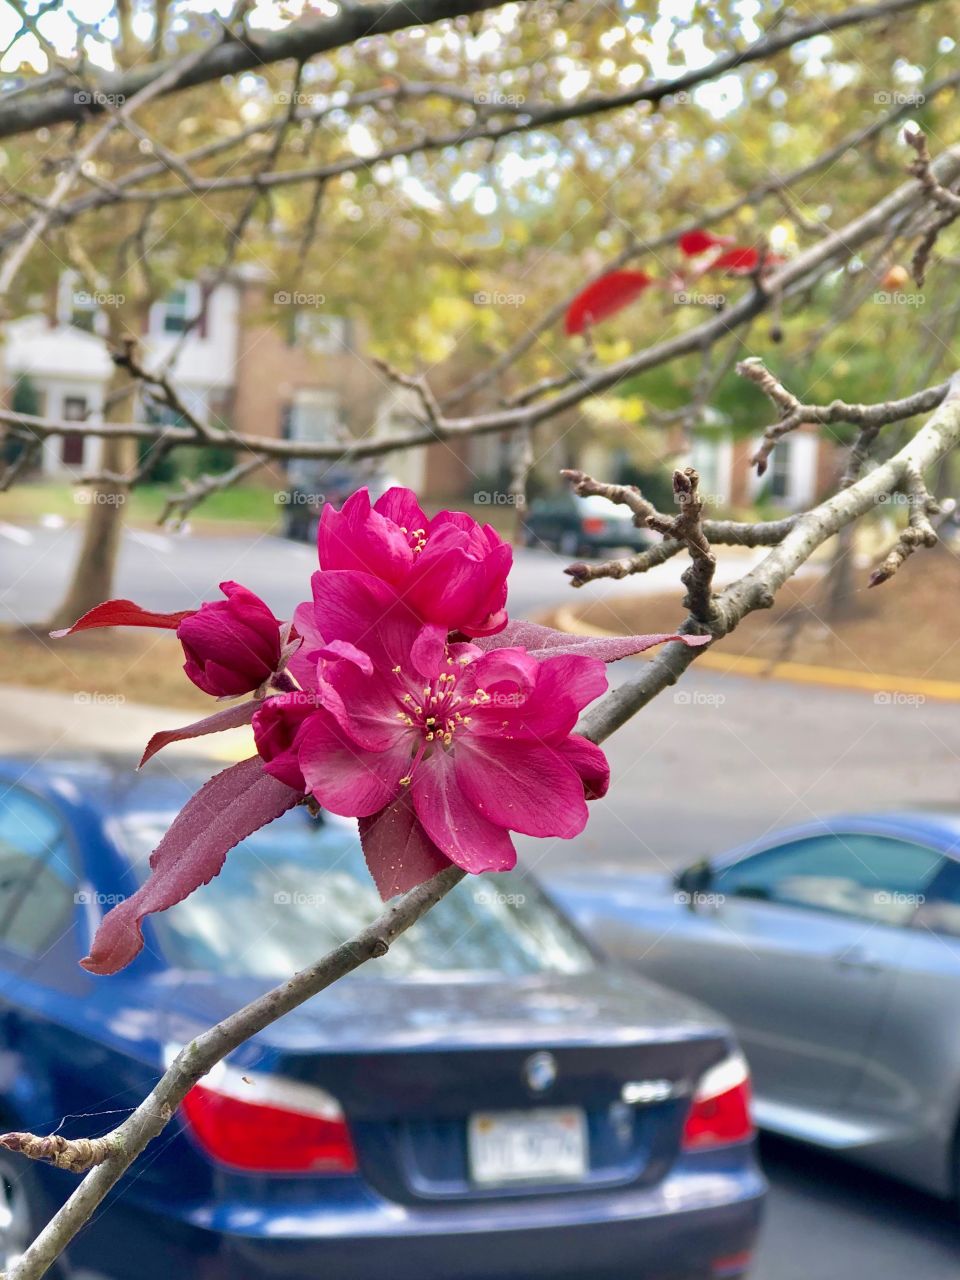 It is fall and leaves have already fallen off. Now suddenly, this is the only flower blooming on entire cranberry tree. I guess, it is because of weird weather pattern. 